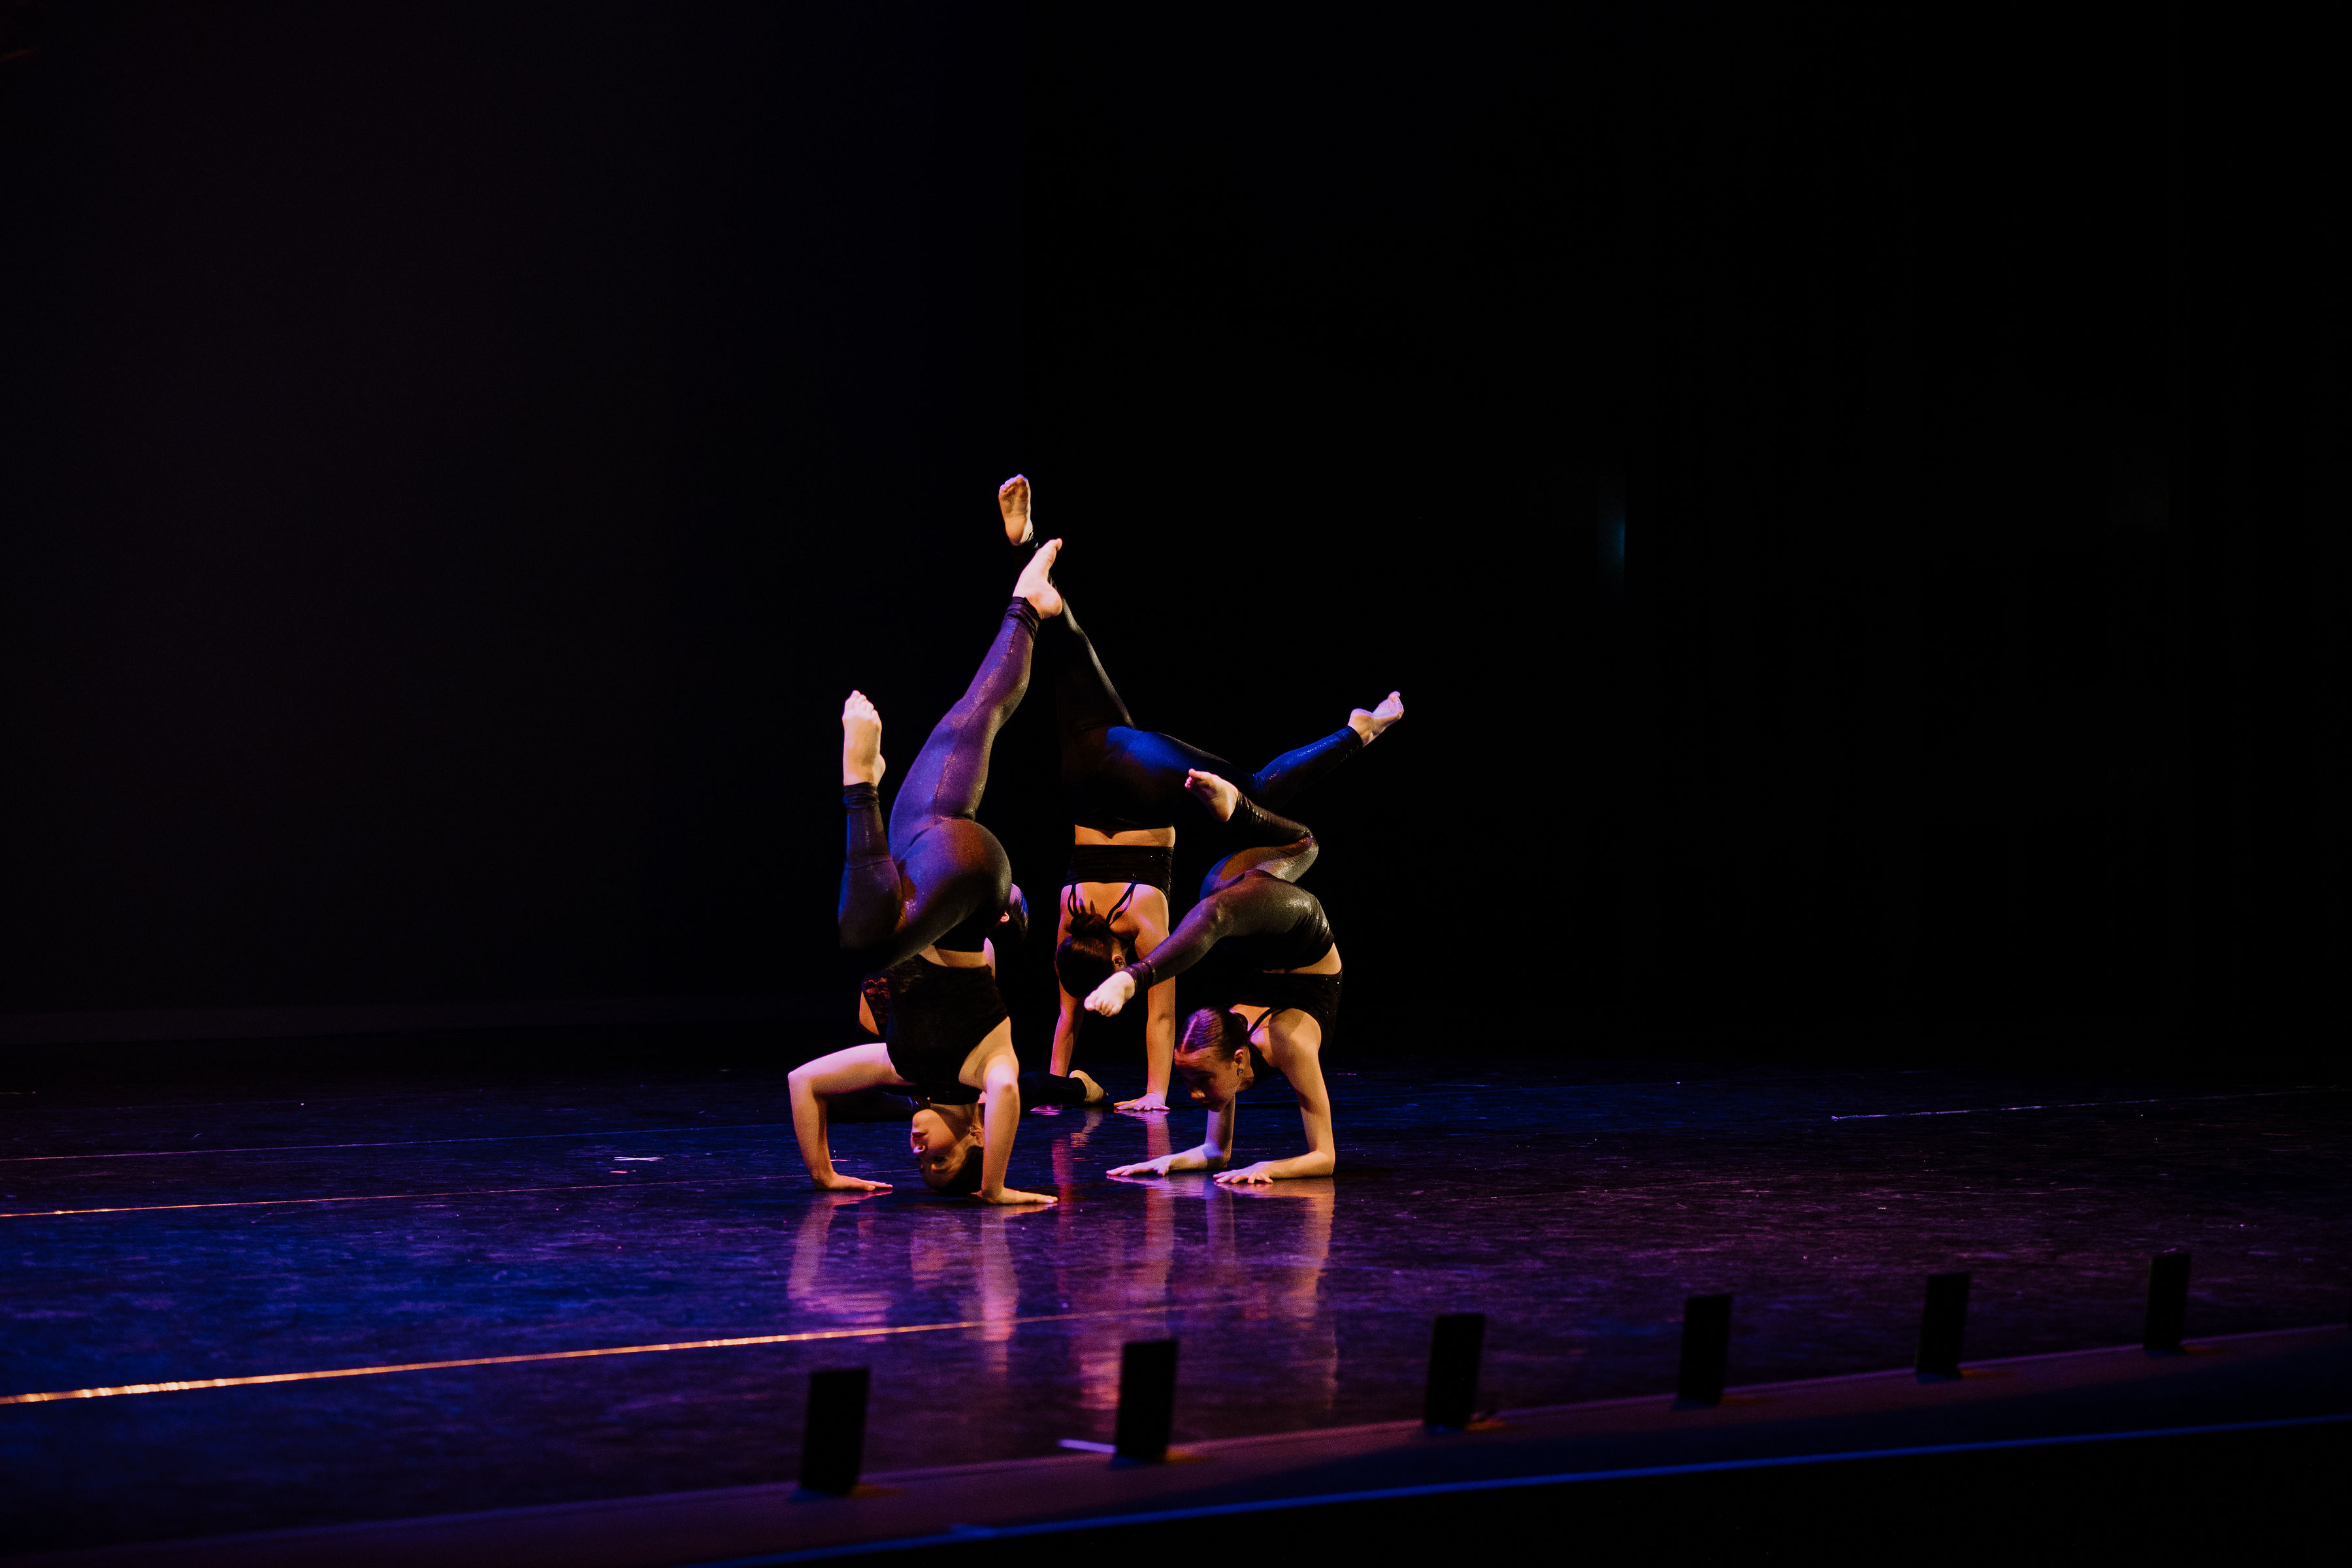 Three dancers in various Acro poses on stage